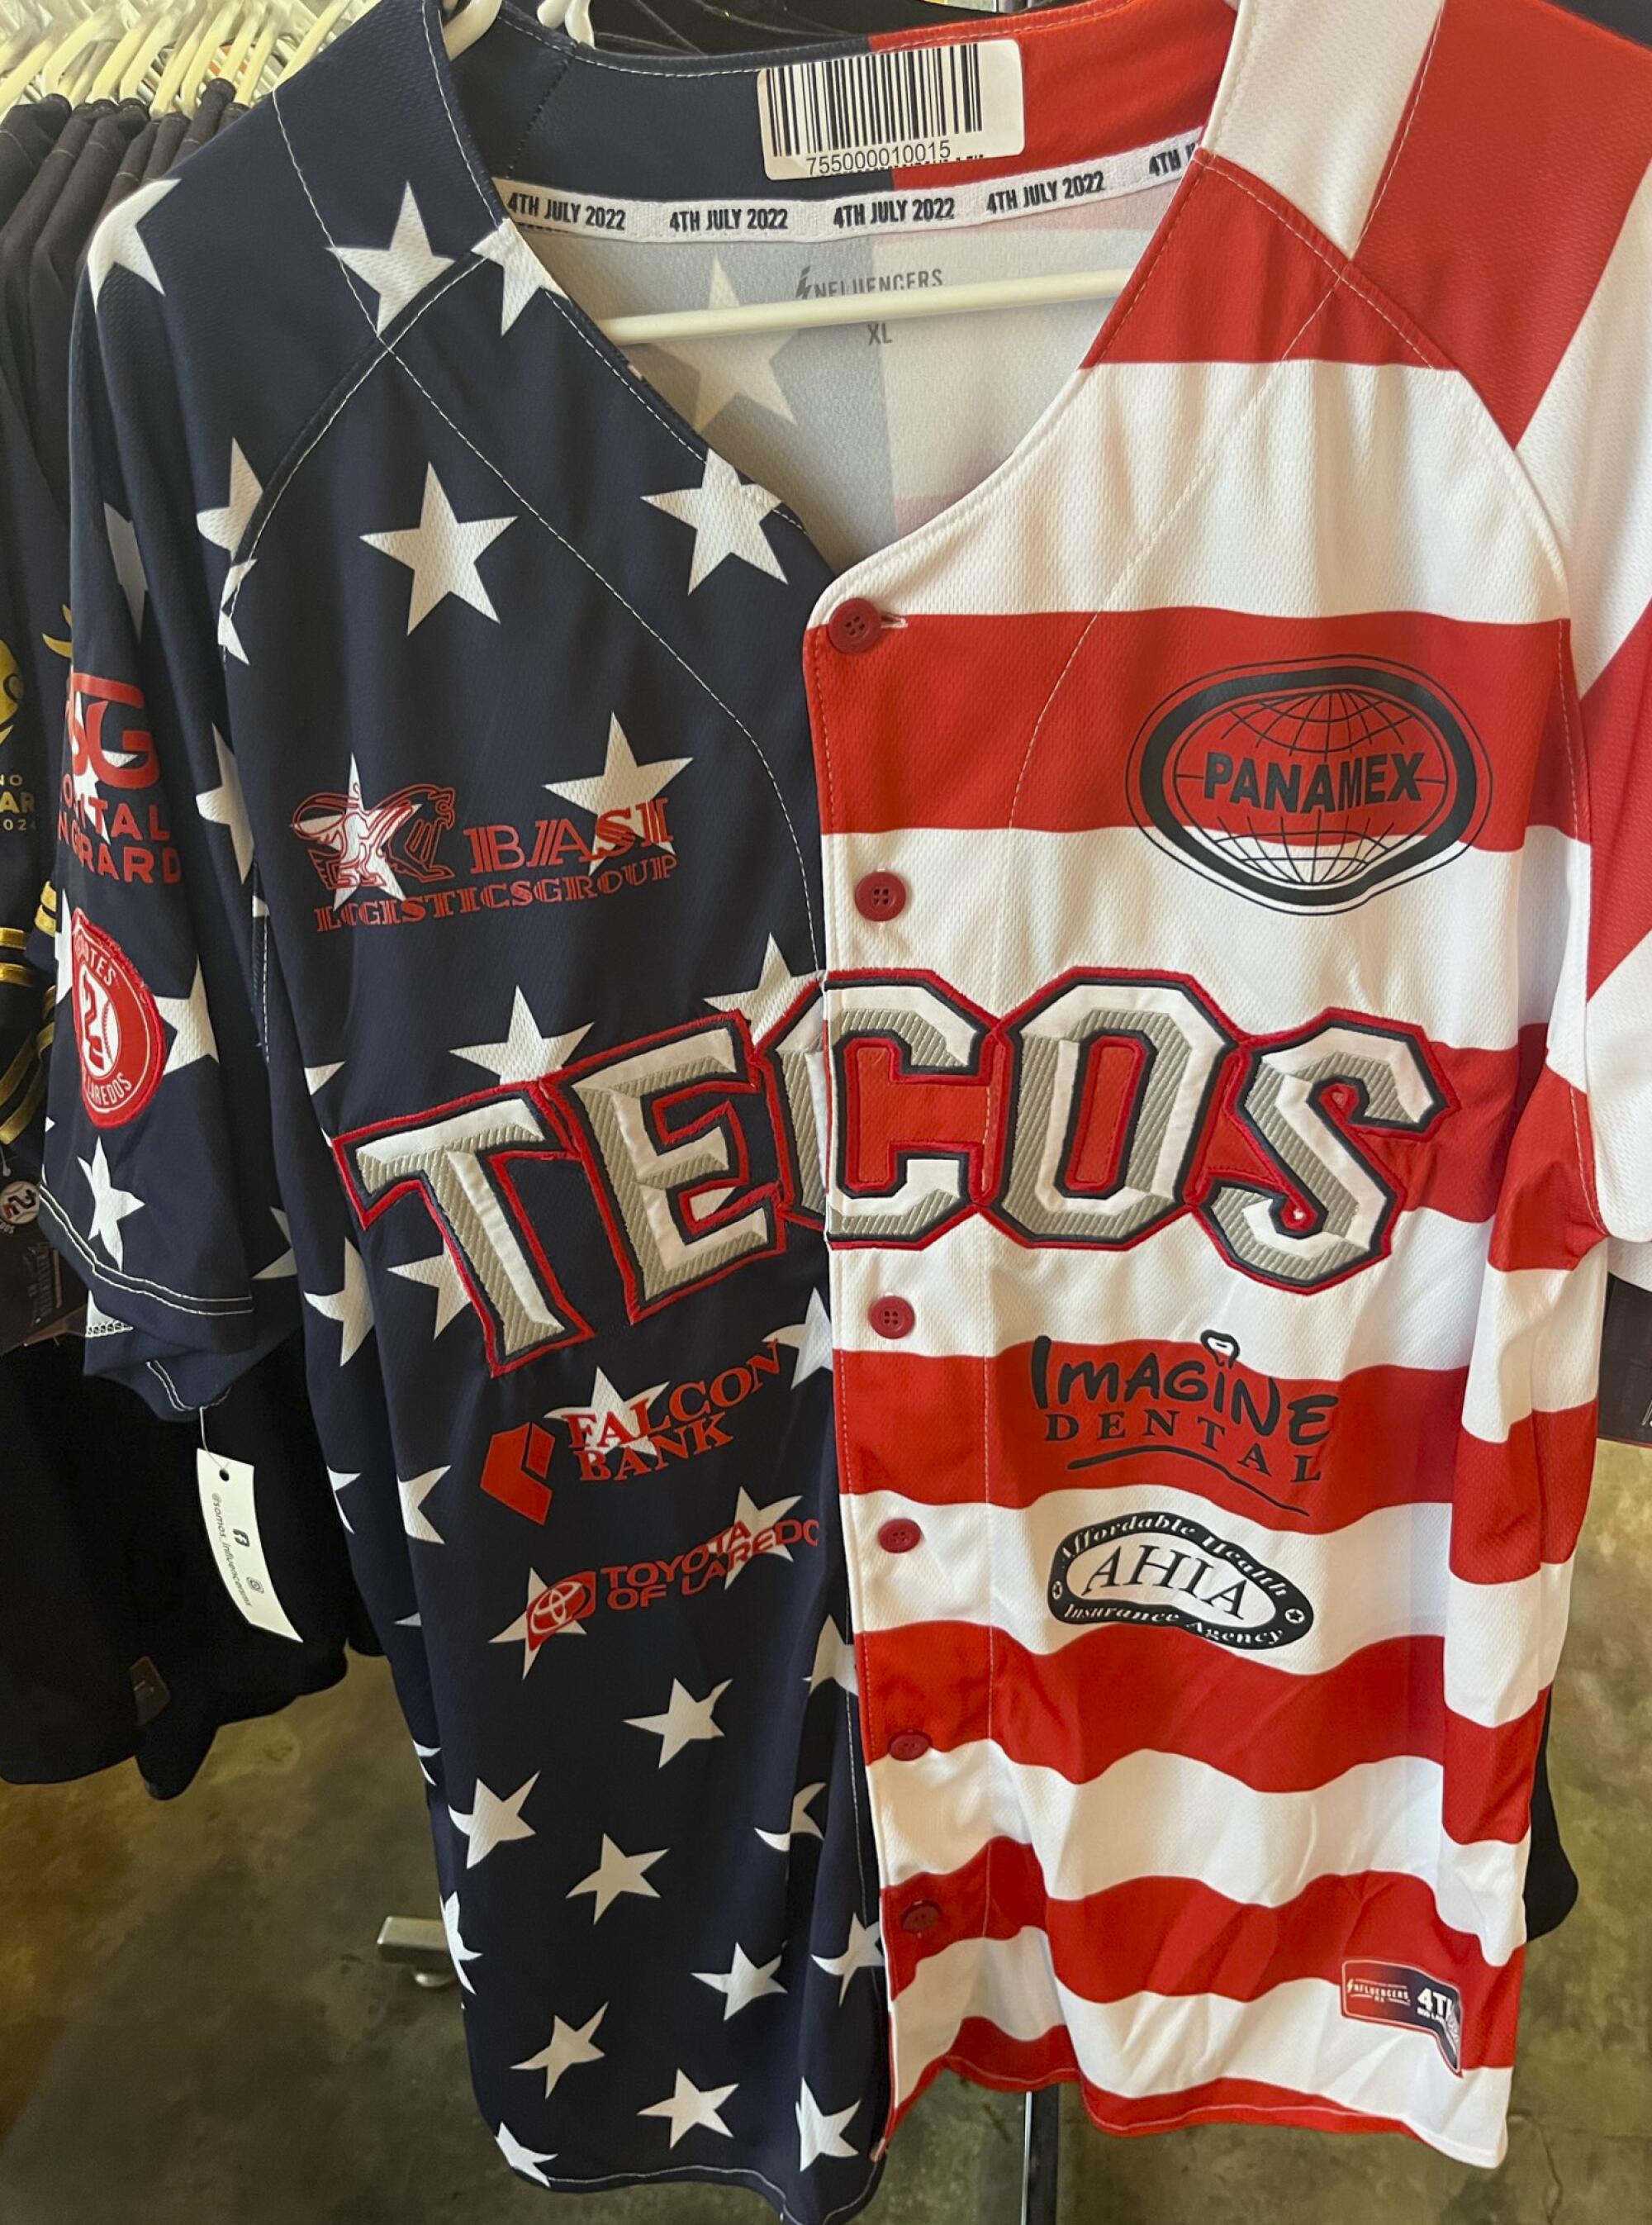 A shirt for sale in the Tecolotes team shop features the colors of the U.S. flag. 